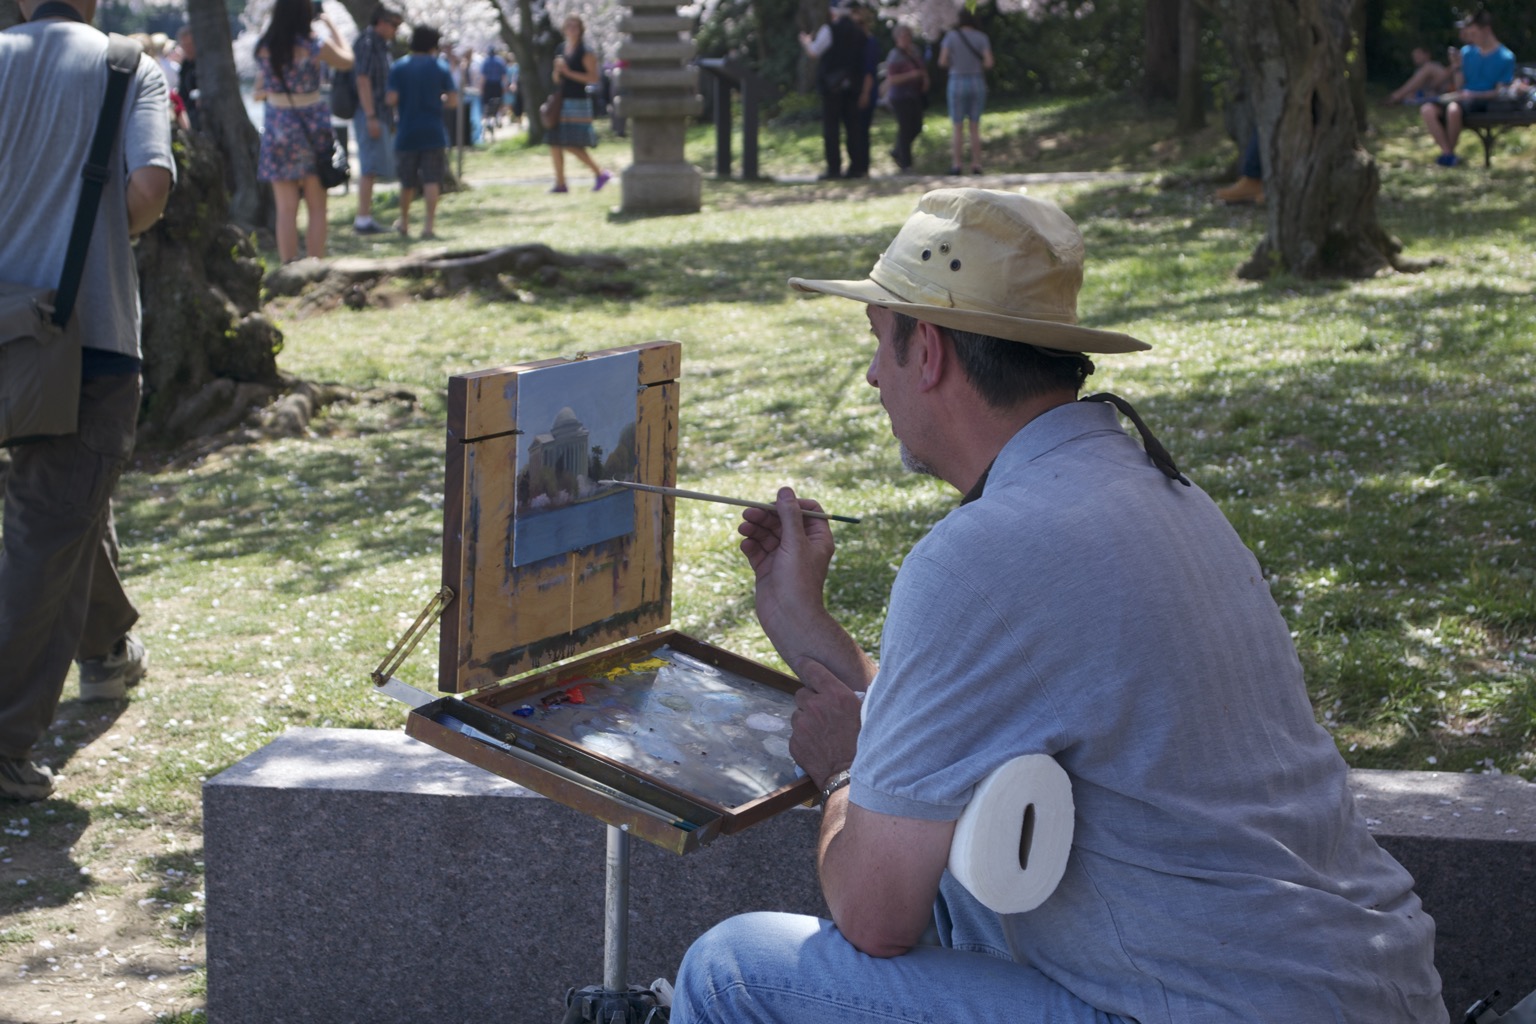 A man painting the Jefferson Memorial